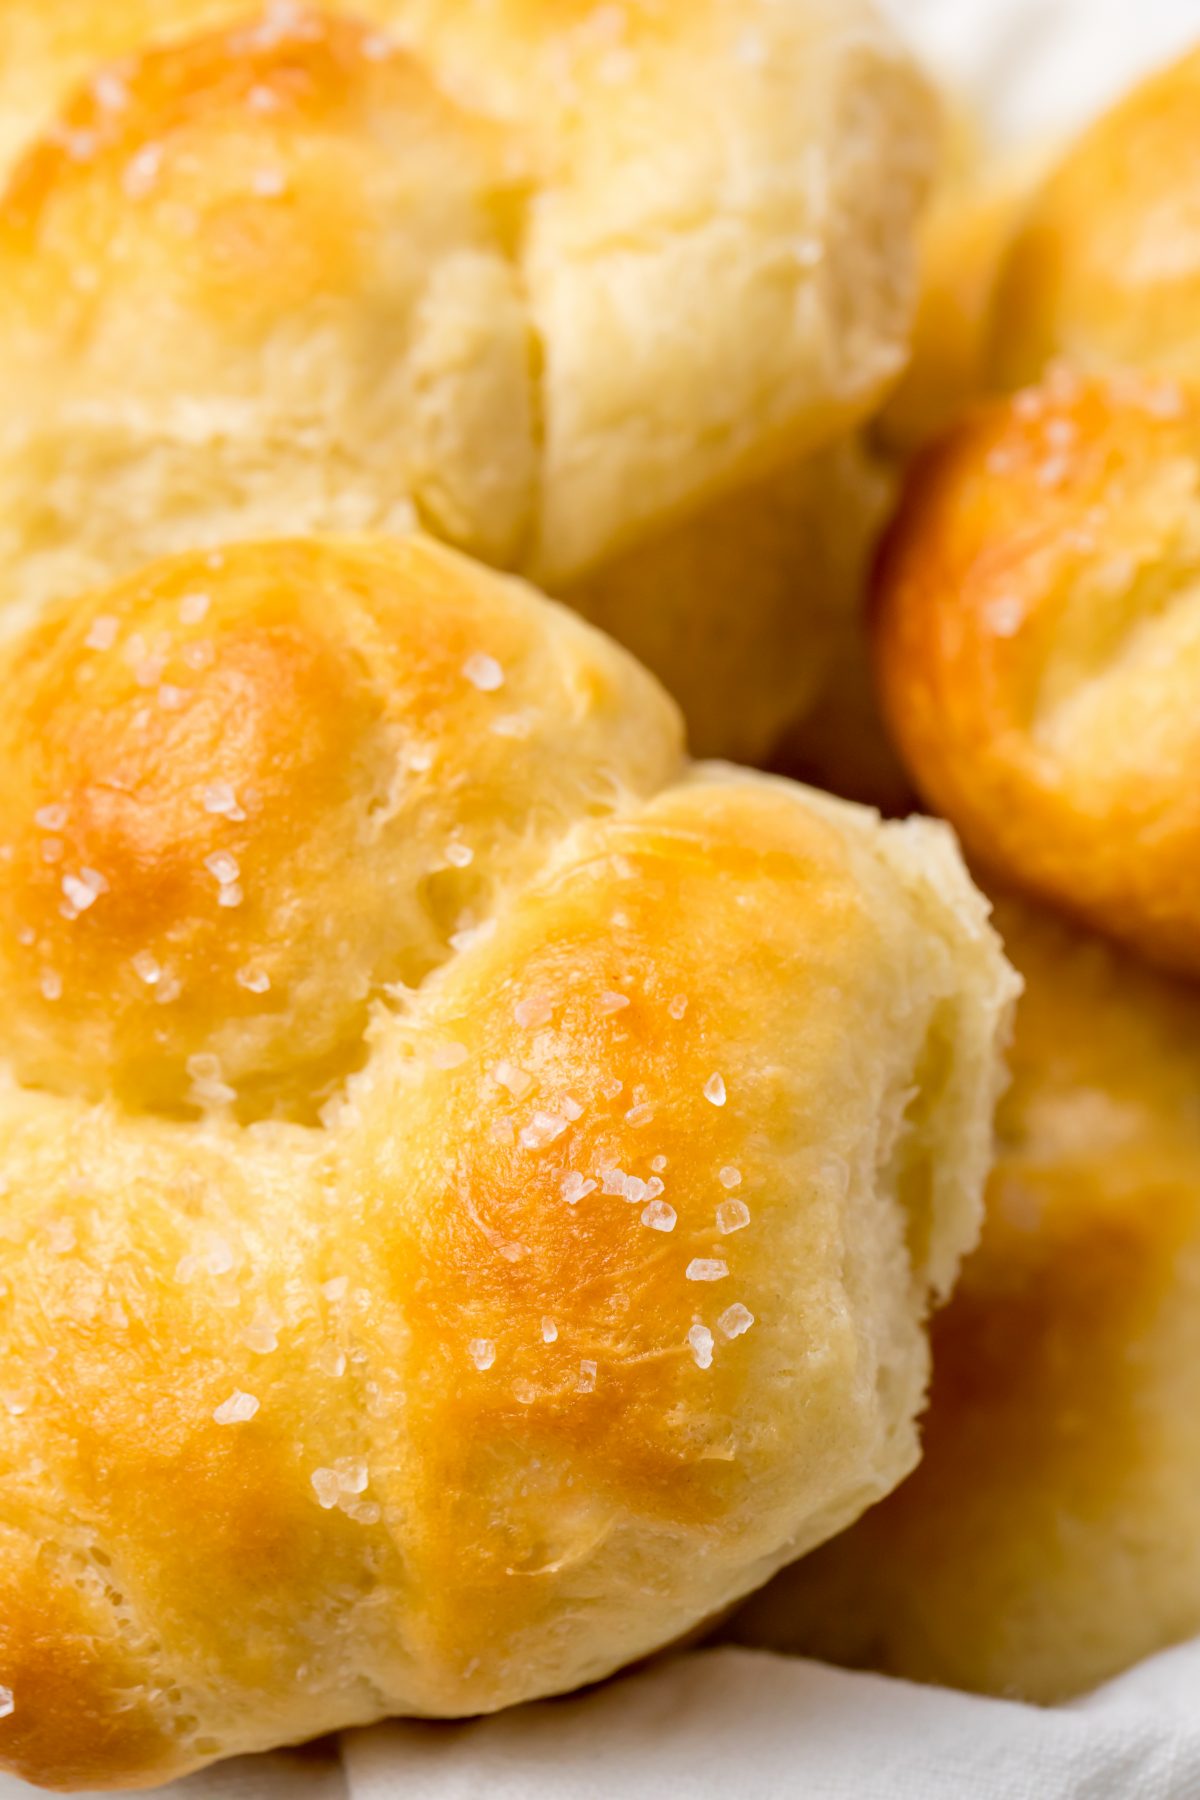 Toasty on the outside and soft on the inside, these rolls will leave everyone wanting more!